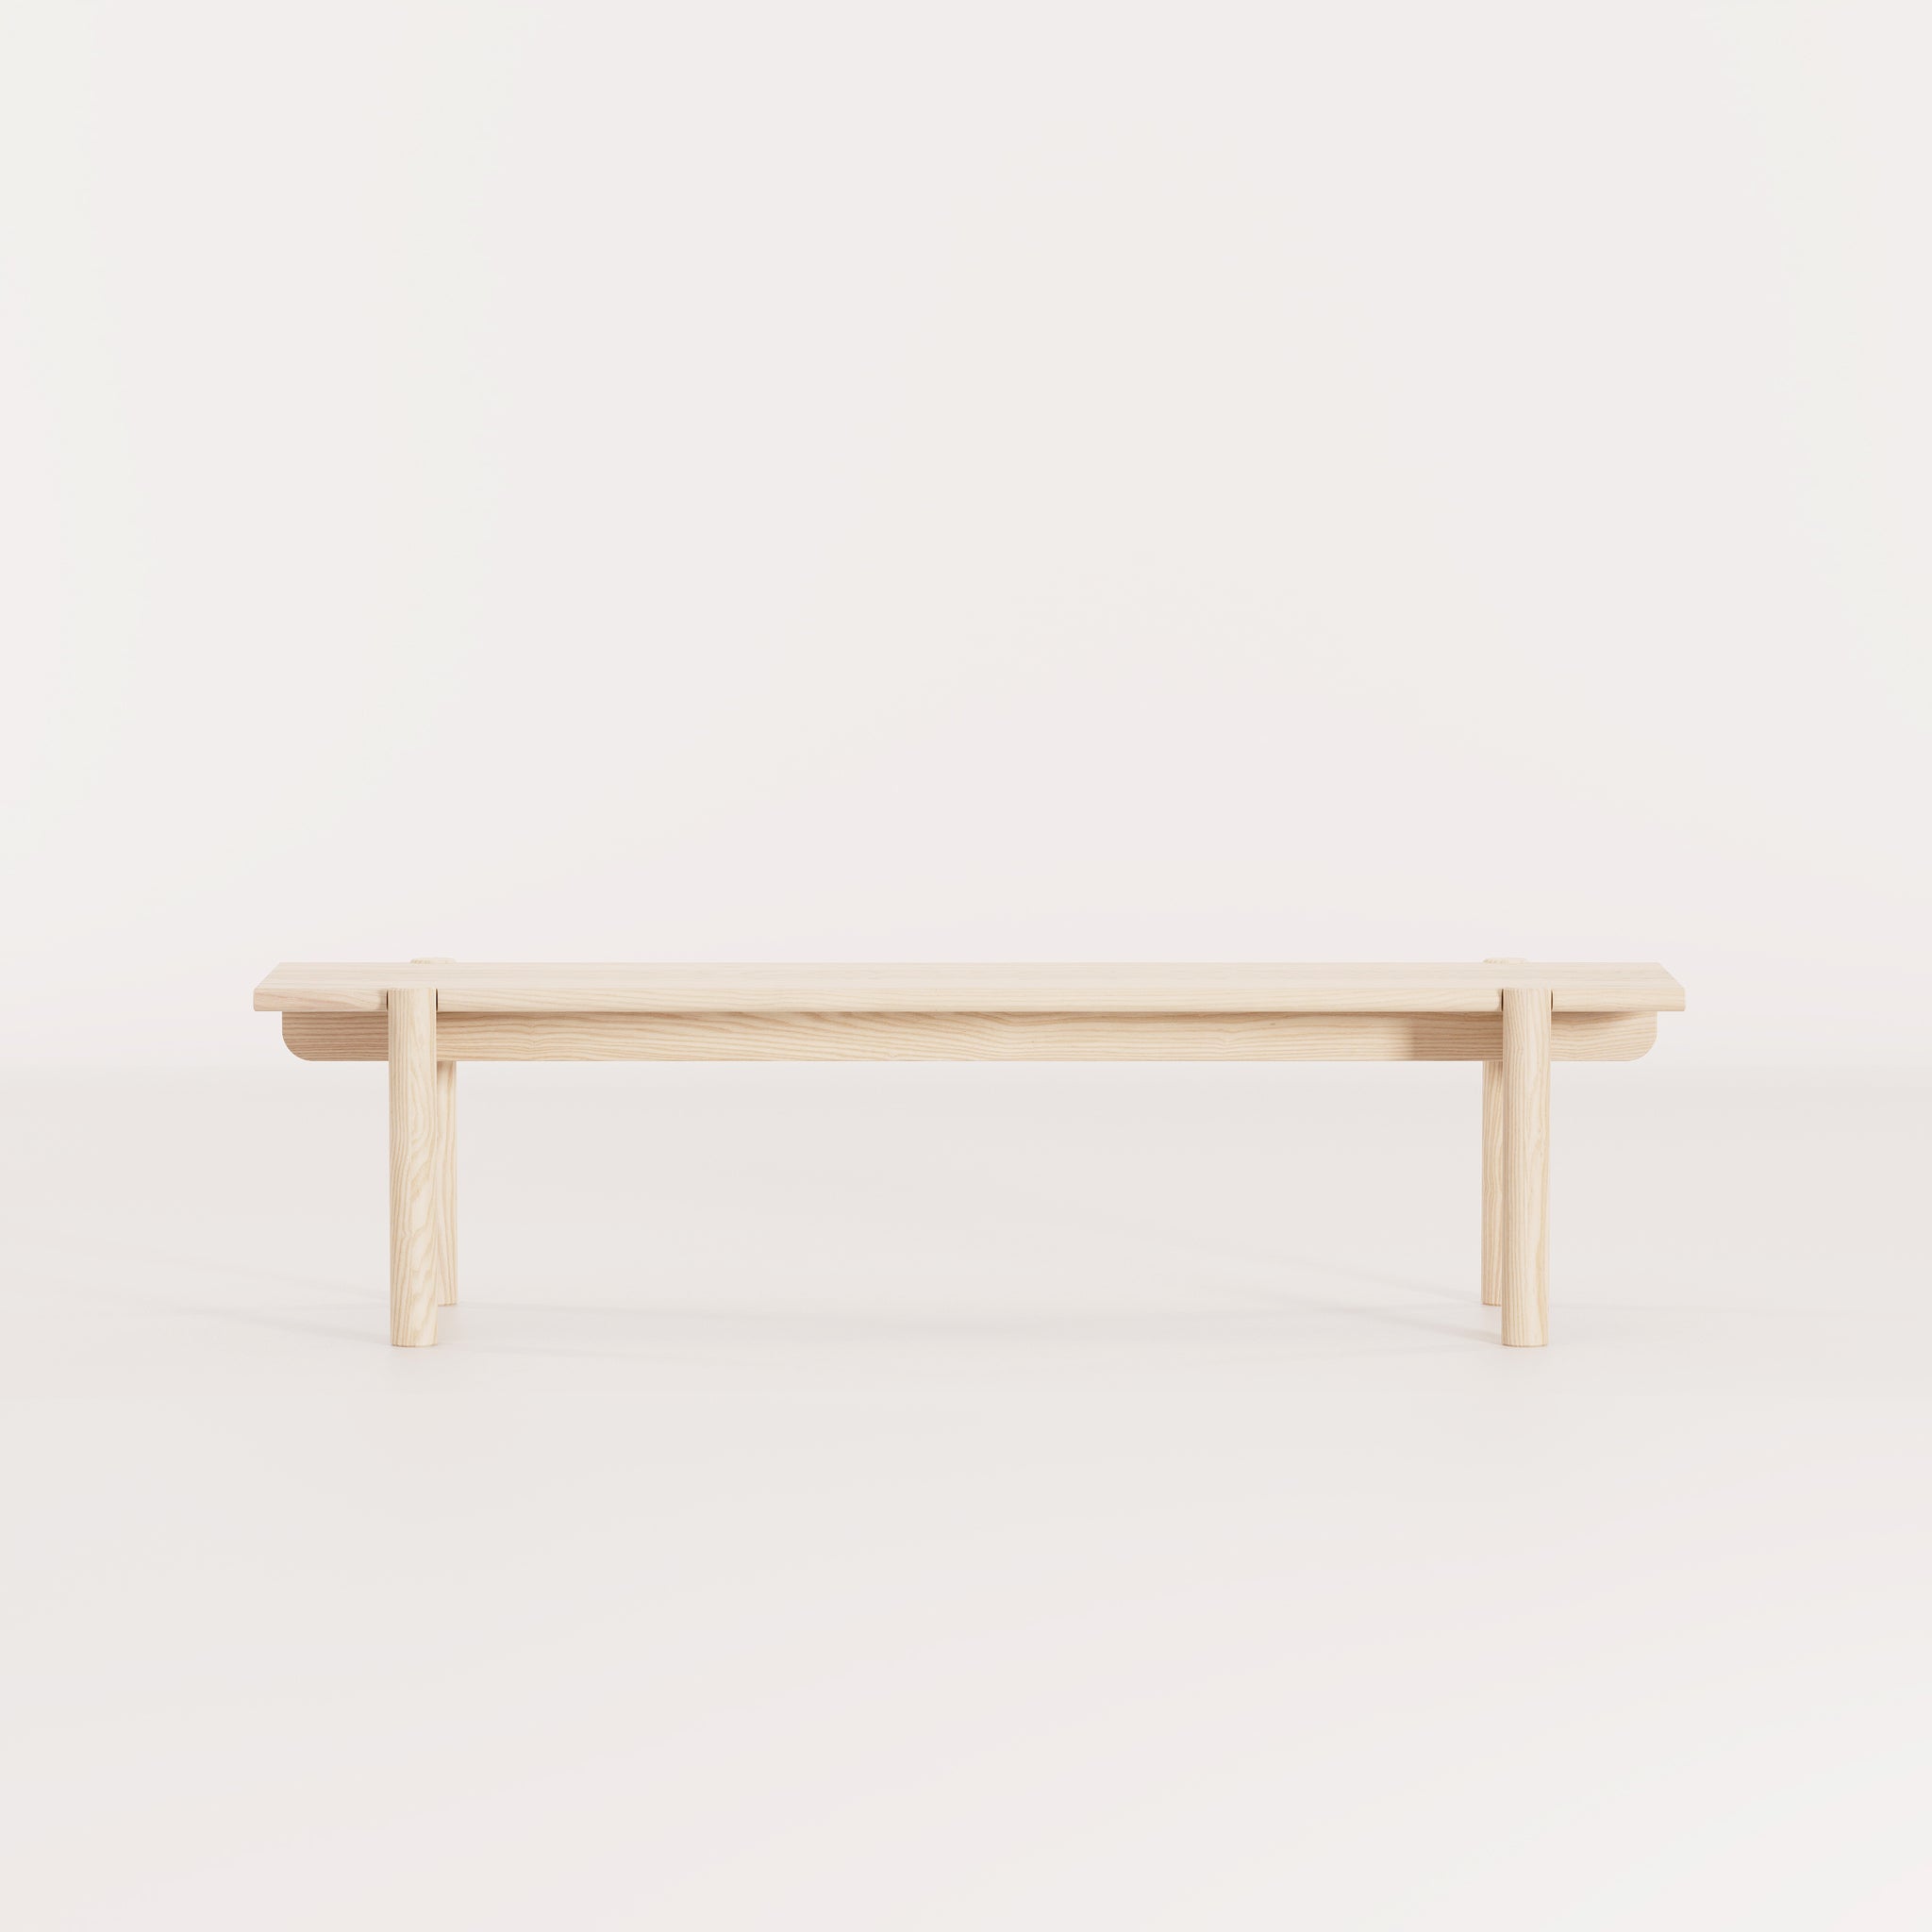 A modern, Australian made bench seat in White Ash timber by Mast Furniture.